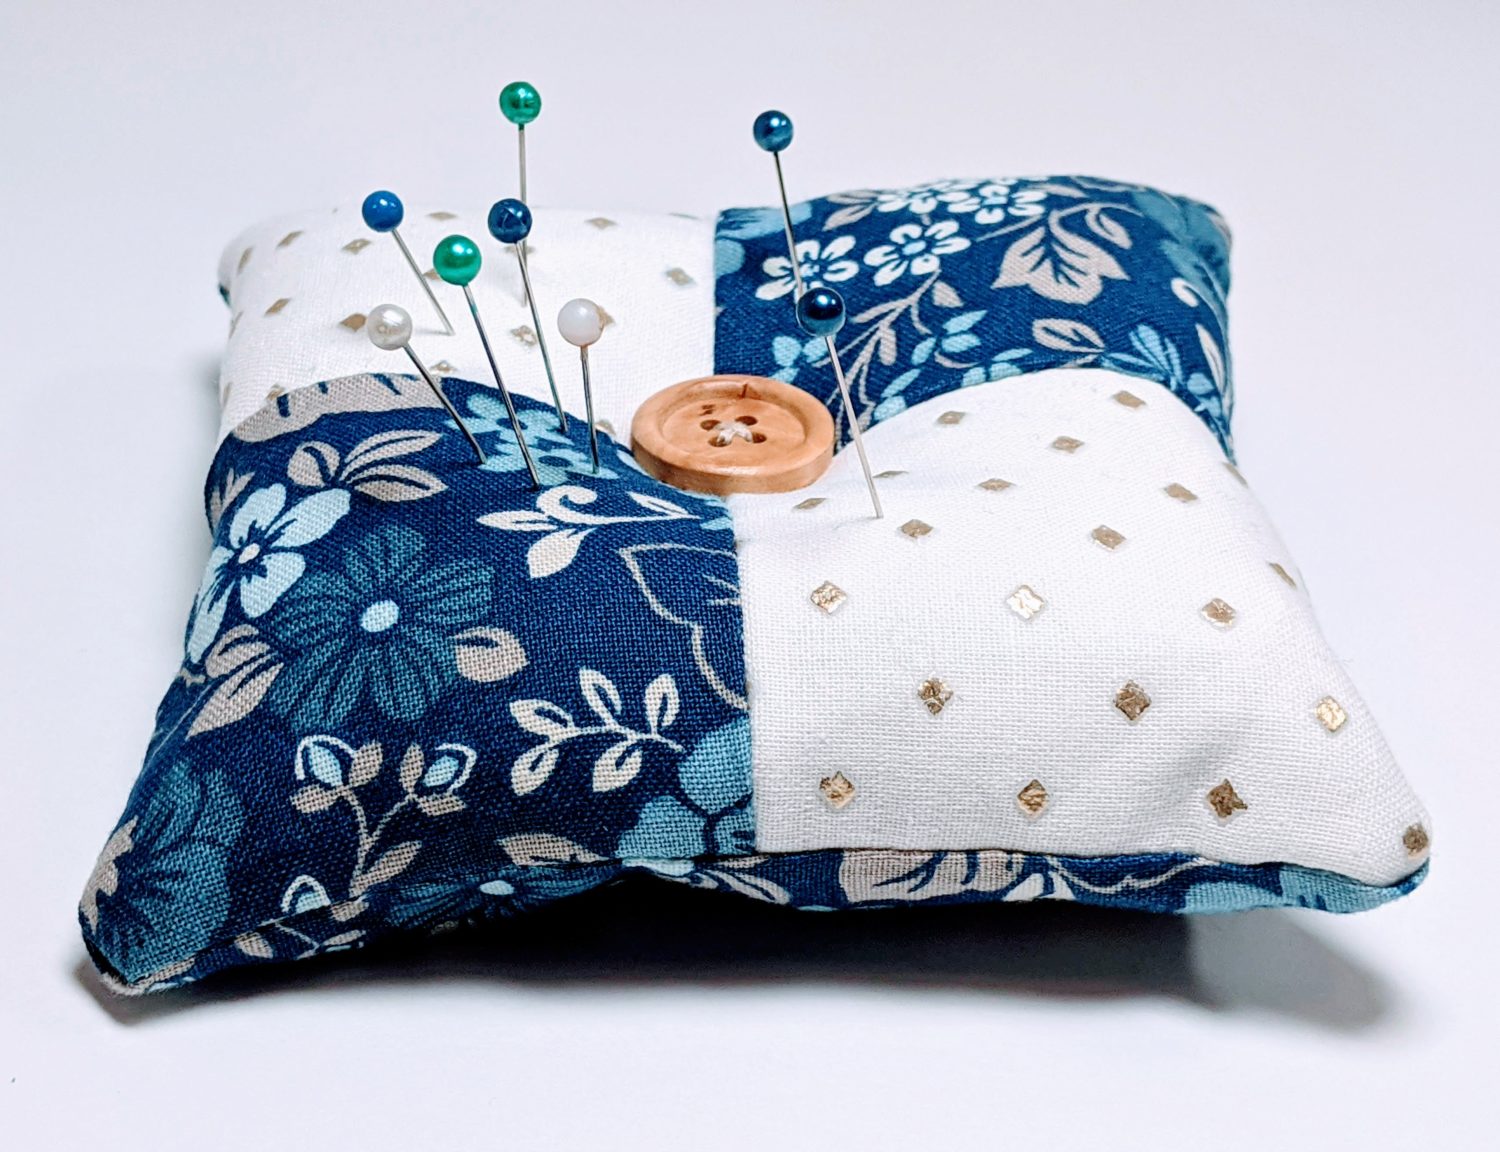 150 Best Pin Cushions ideas  pin cushions, pin cushions patterns, sewing  projects